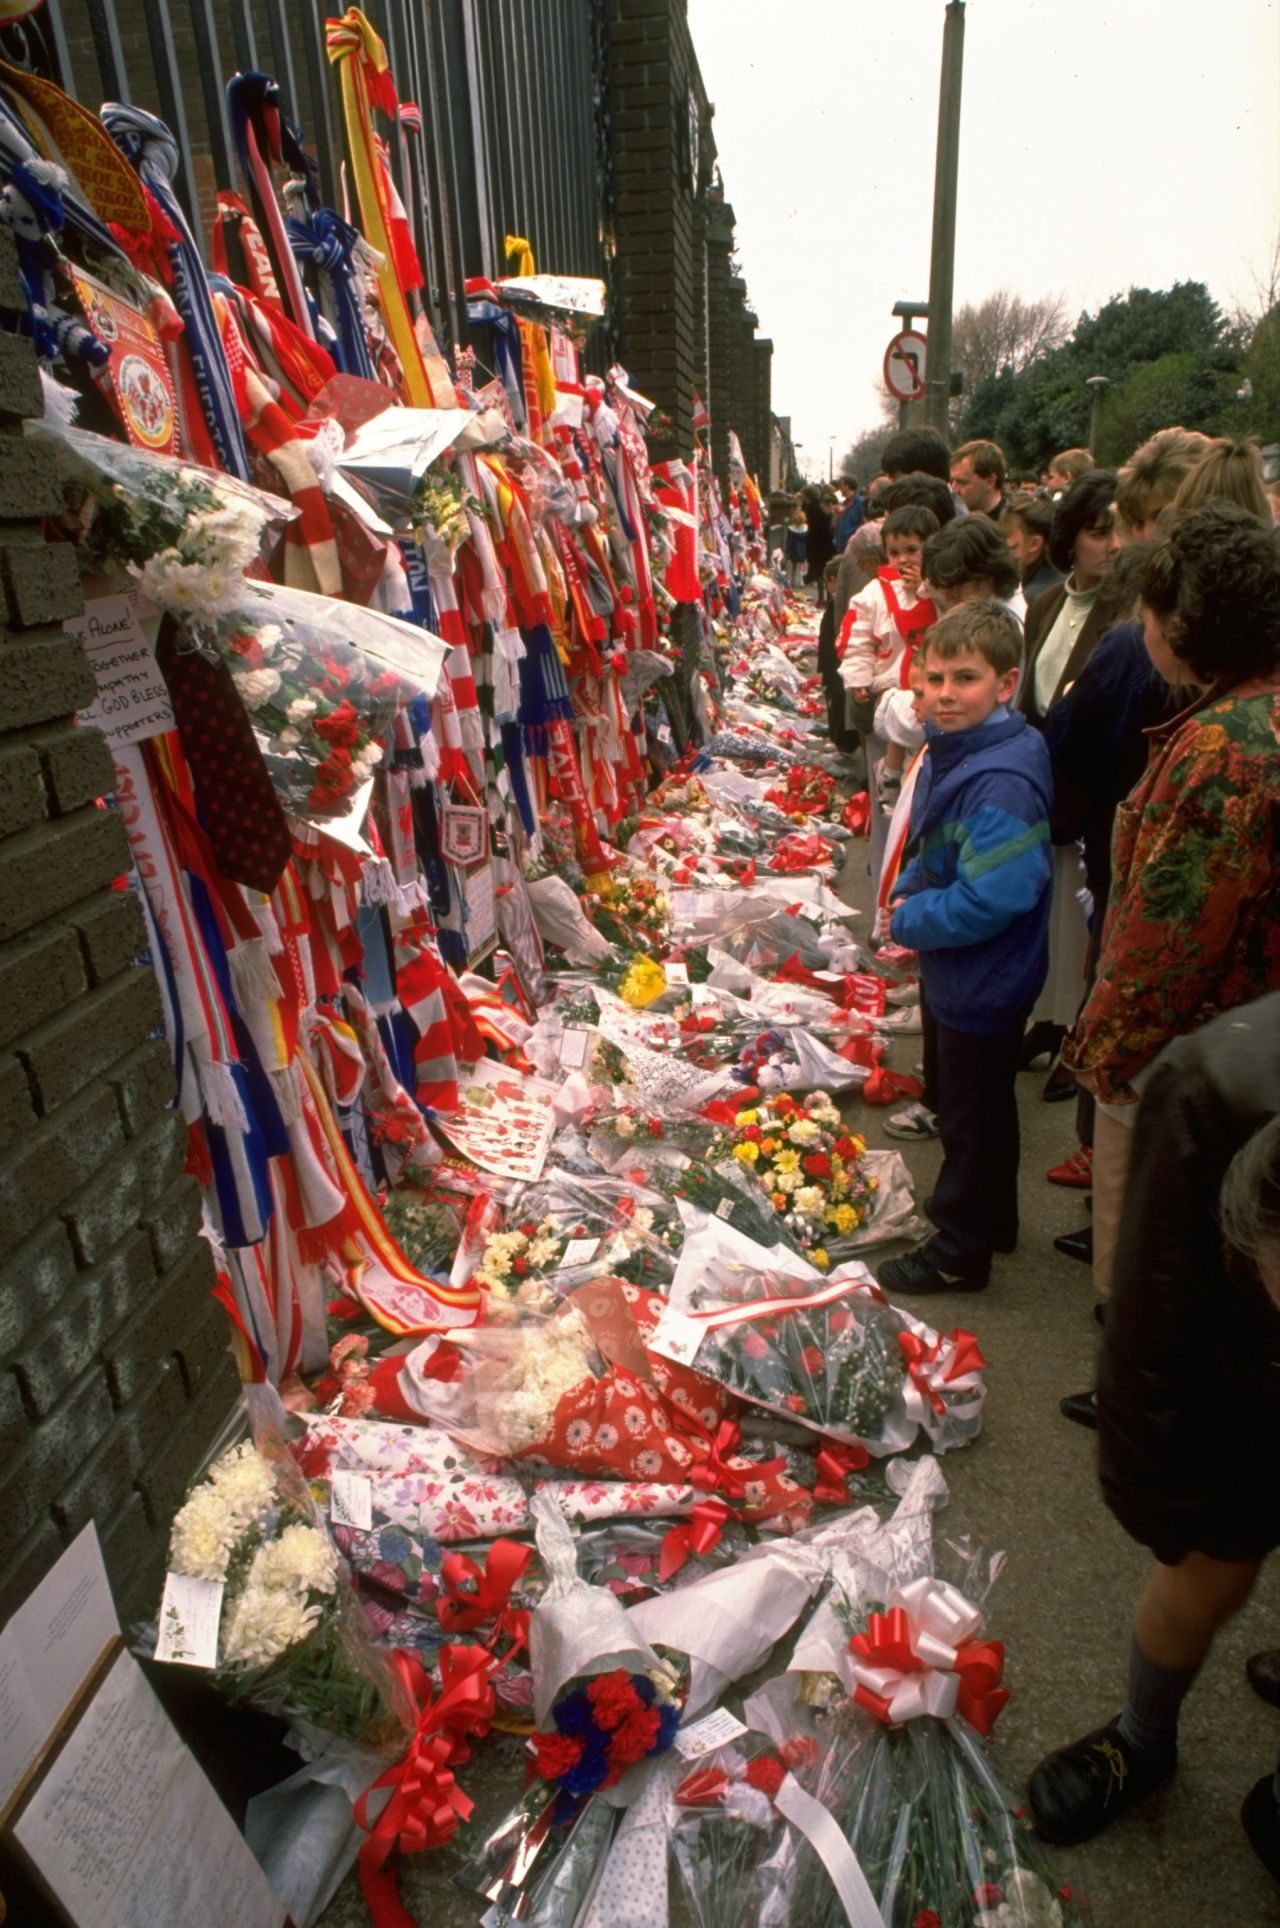 In the immediate aftermath, people from throughout Britain left tributes at Liverpool's Anfield stadium.